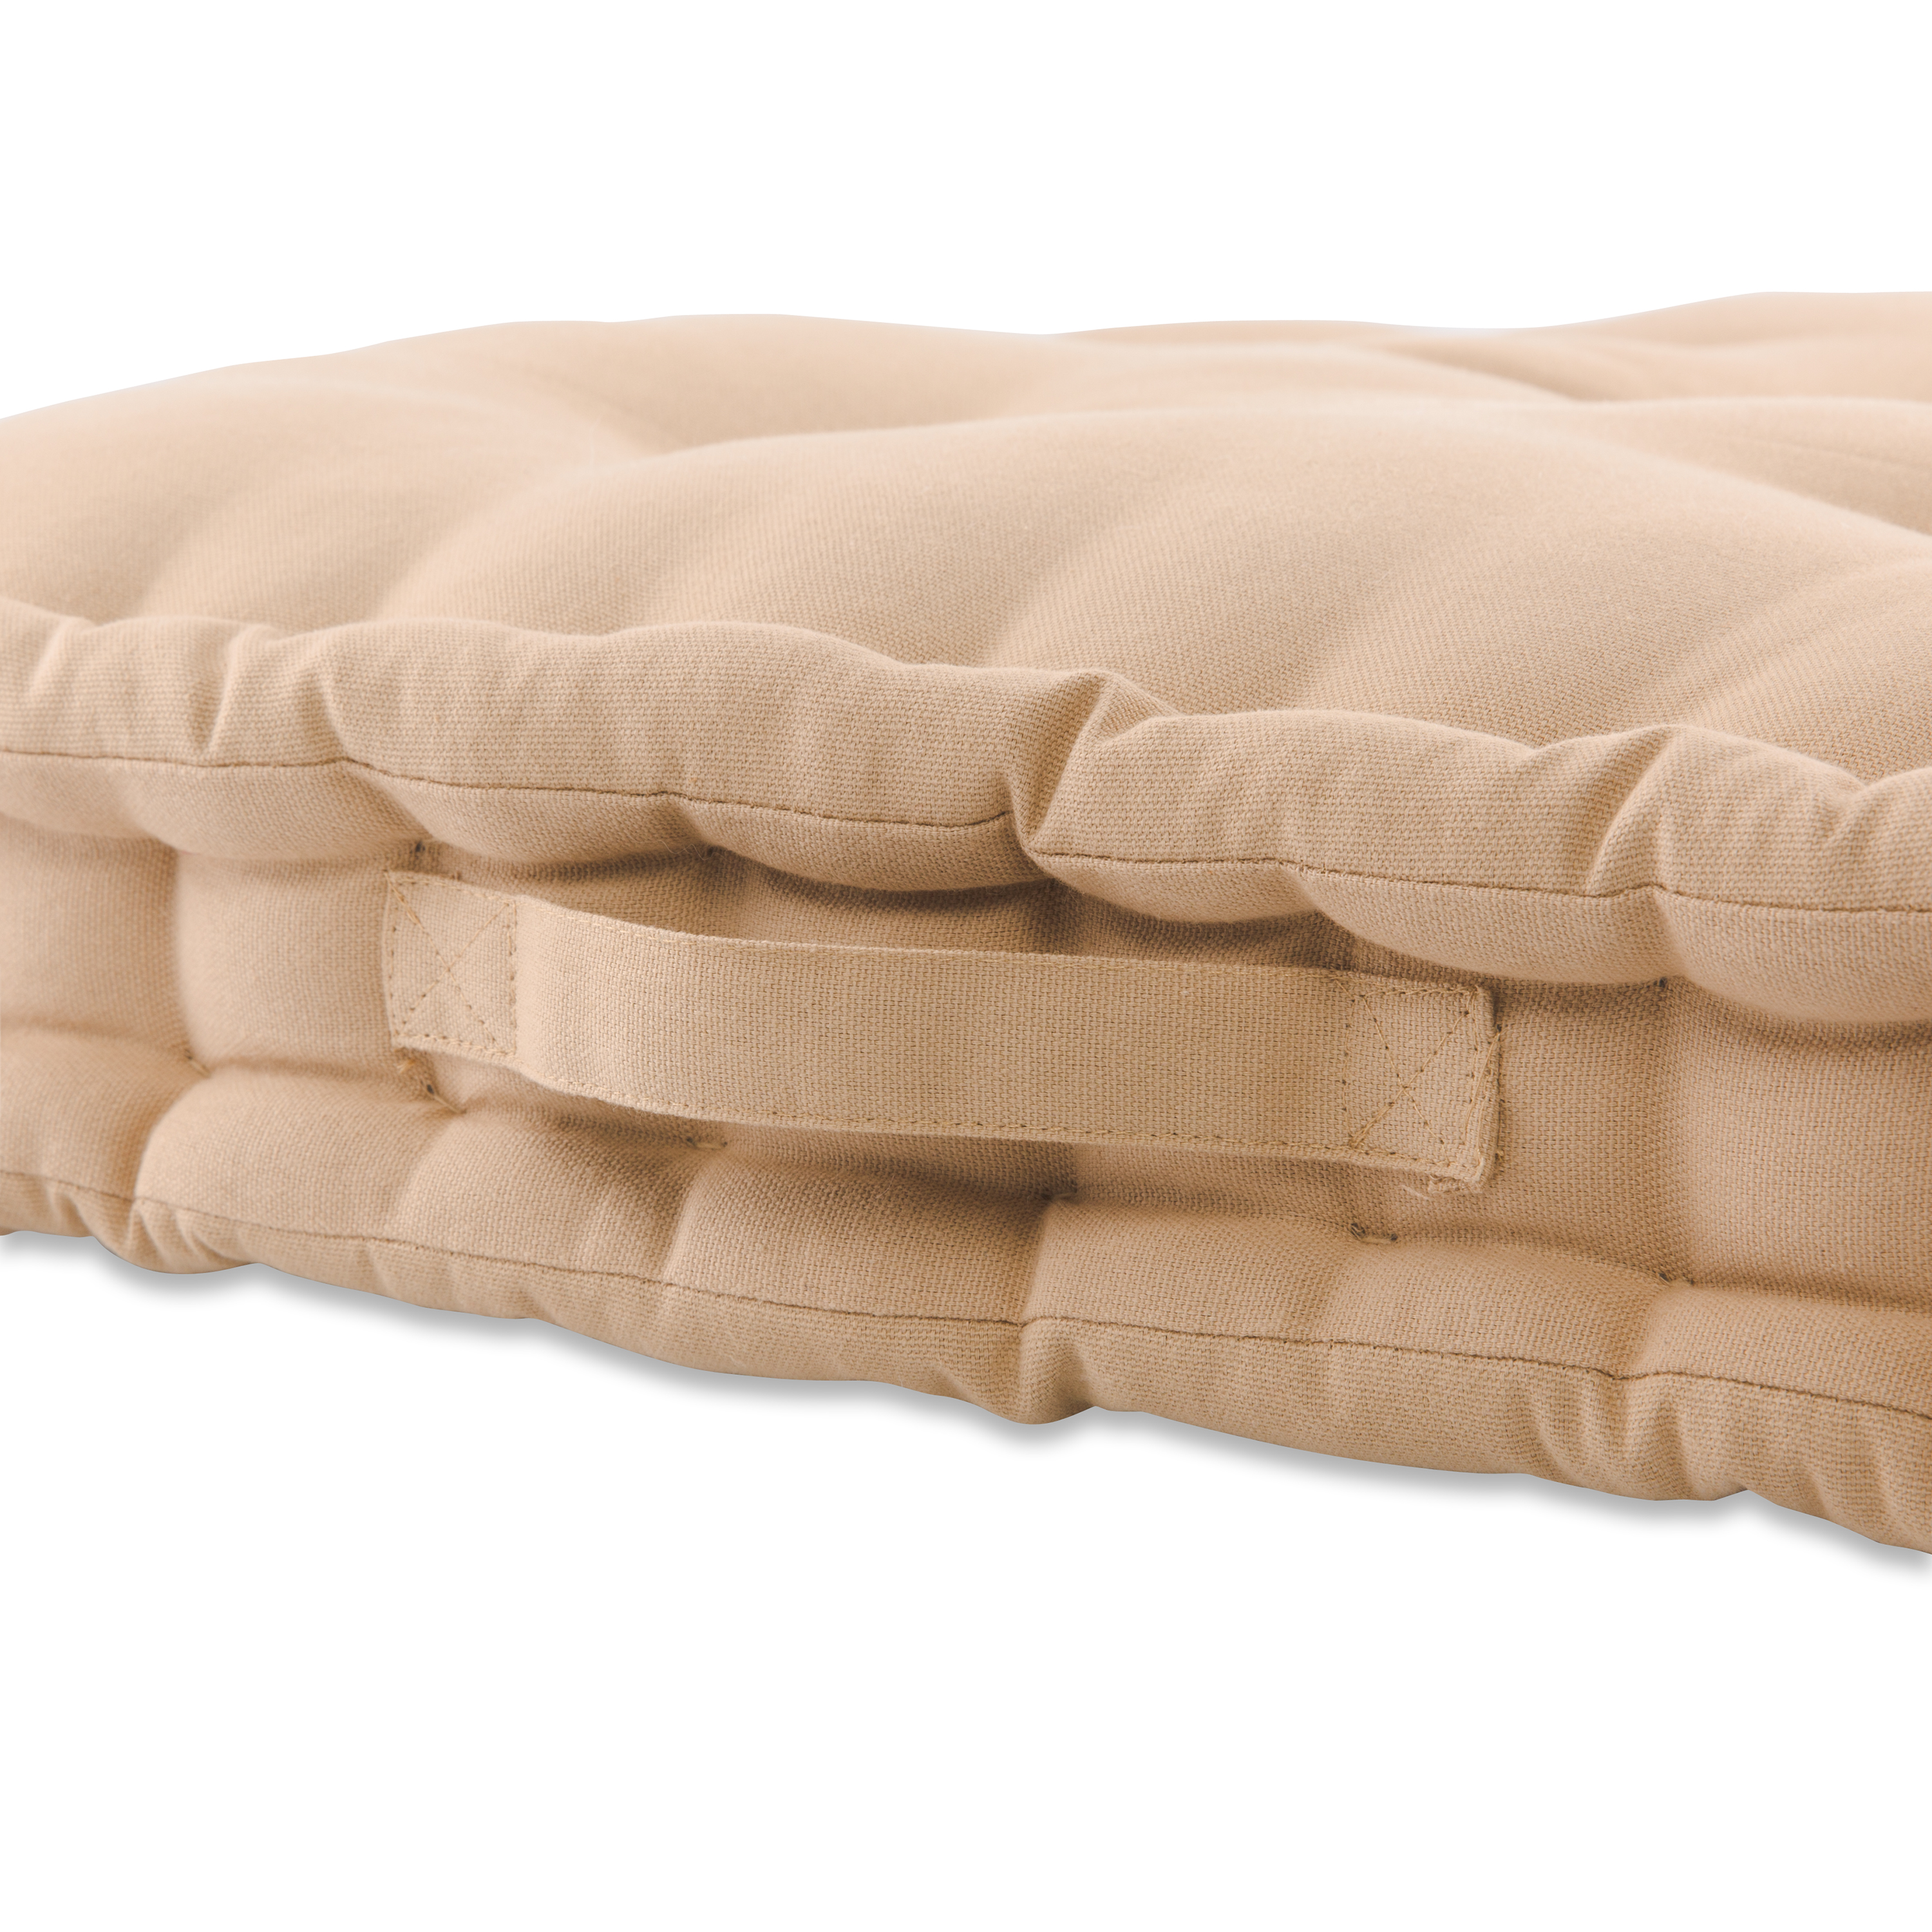 Better Homes & Gardens Tufted Square Floor Cushion, Size 24" x 24", Vanilla Bean - image 4 of 4